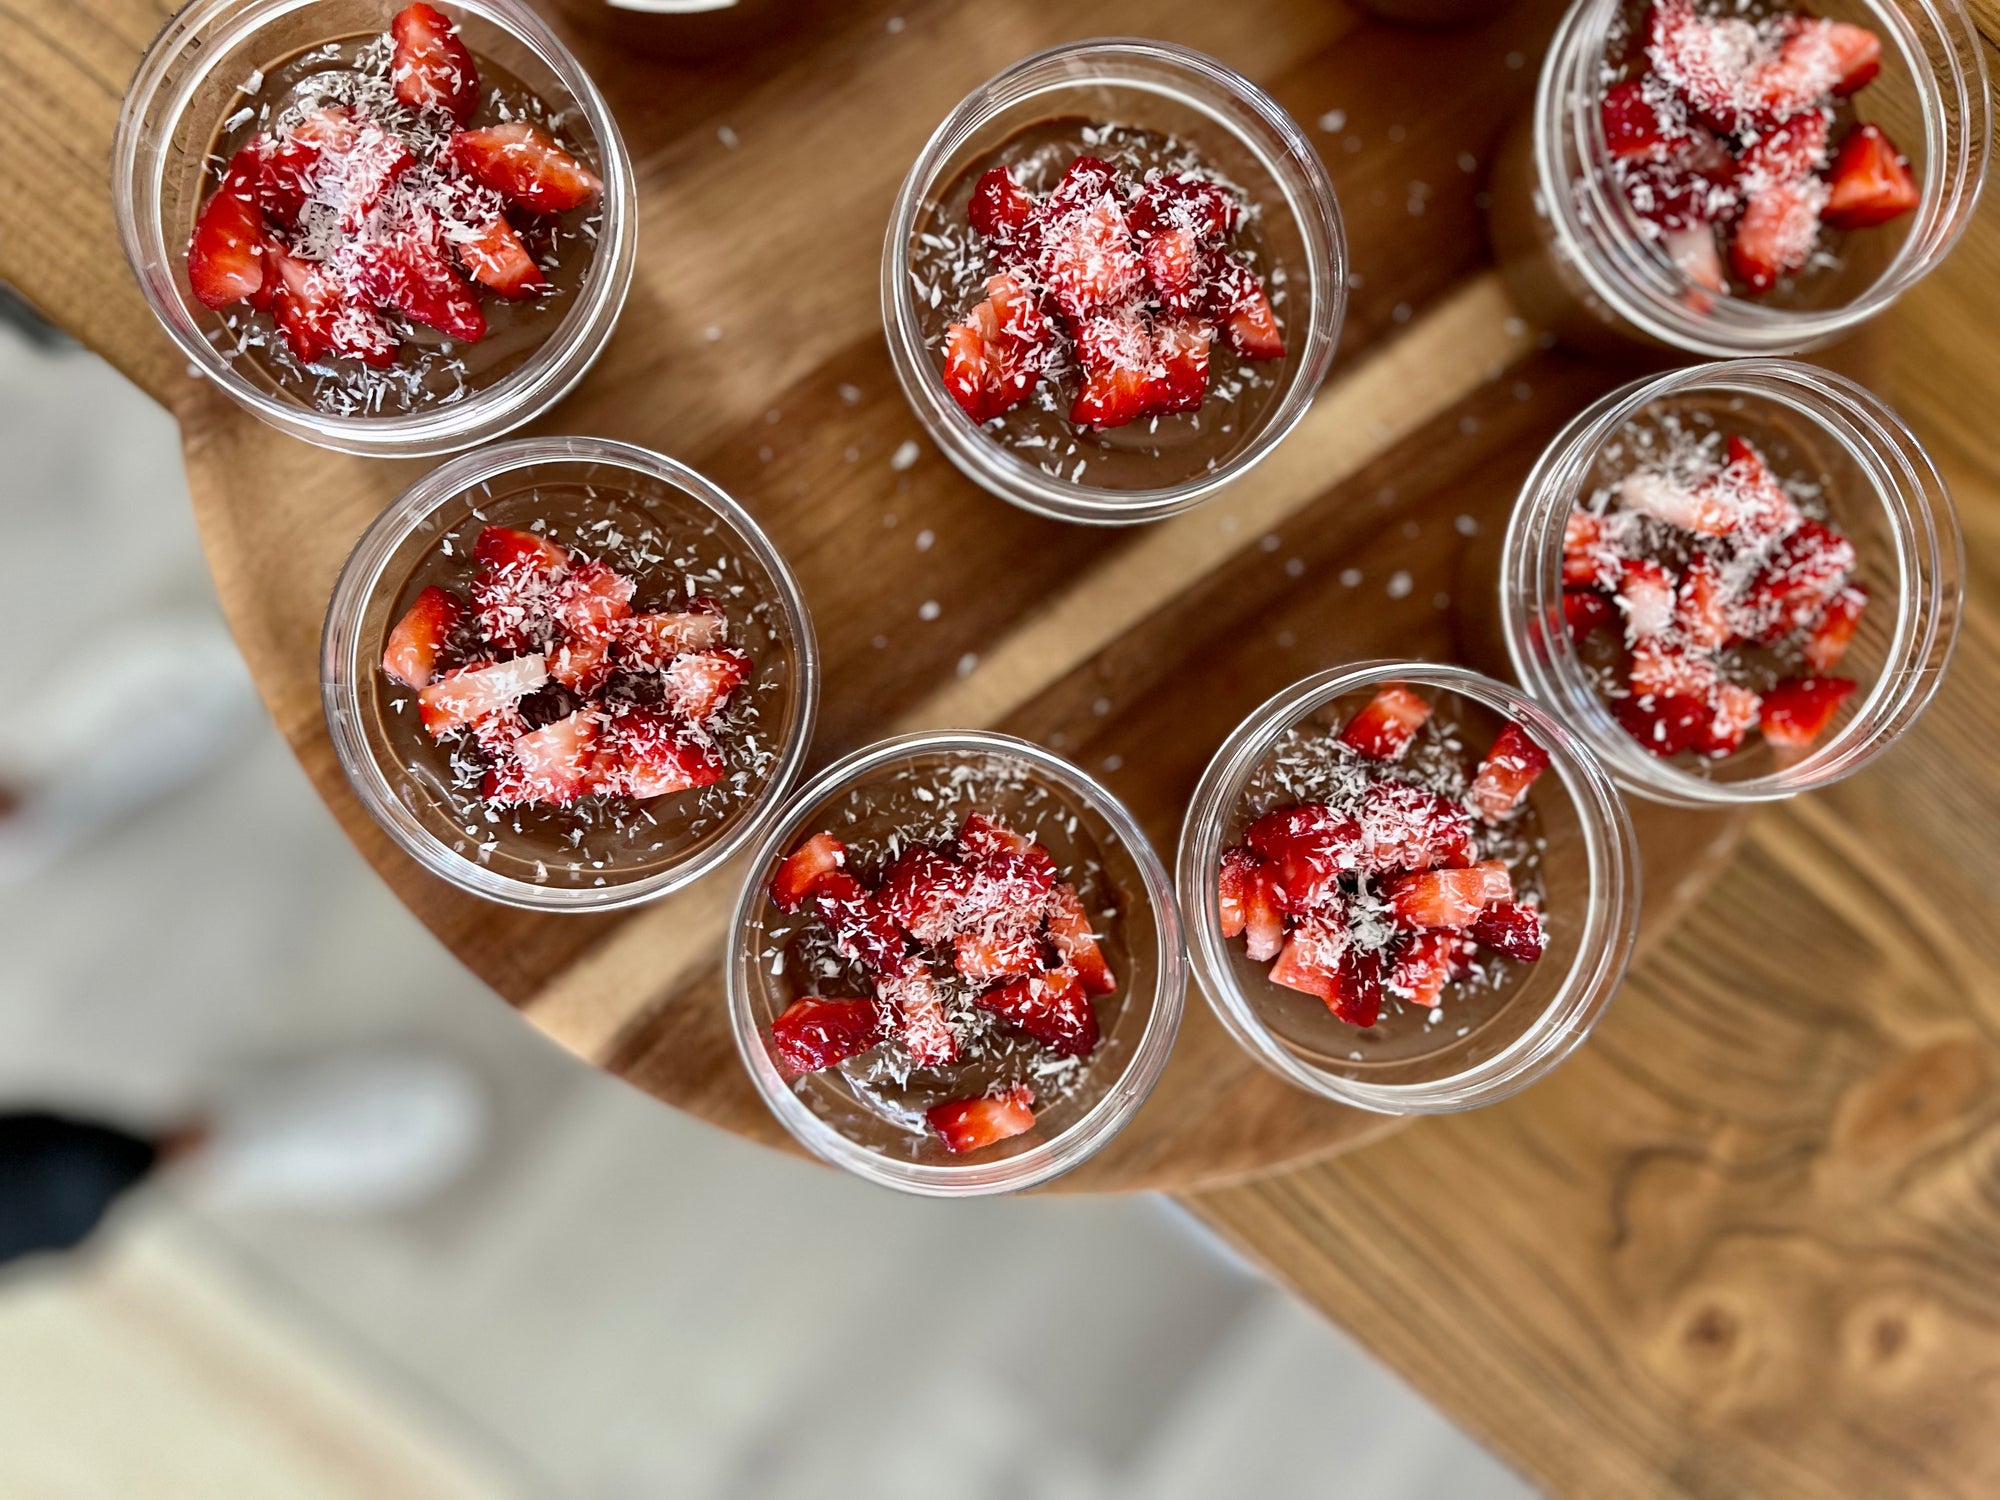 Healthy "Soil" Pudding by Chef Tara Middleton